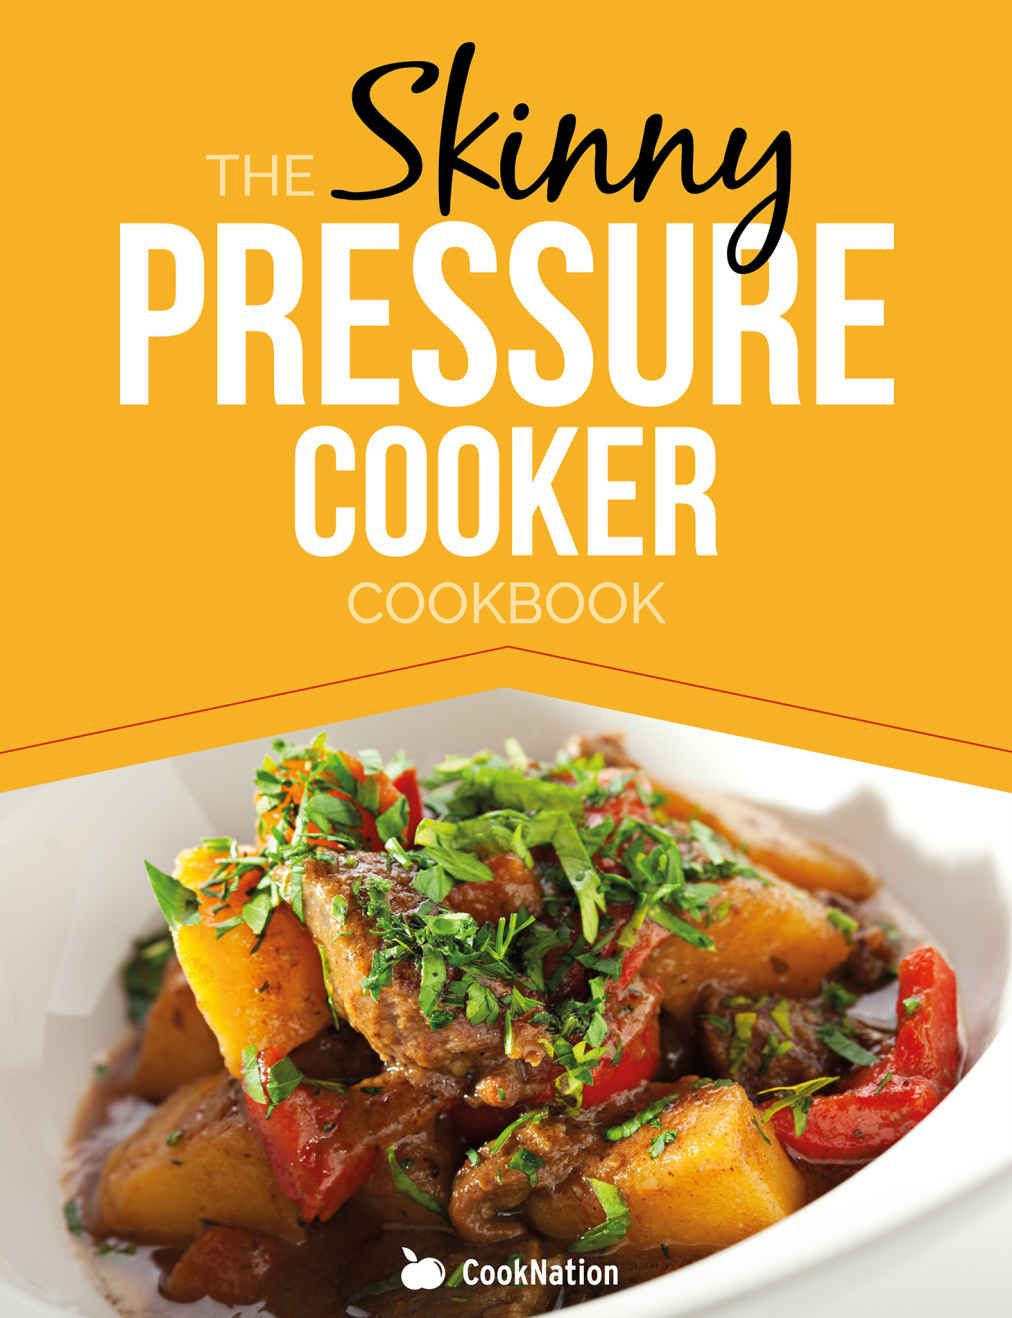 Low Calorie Pressure Cooker Recipes
 The Skinny Pressure Cooker Cookbook Low Calorie Healthy